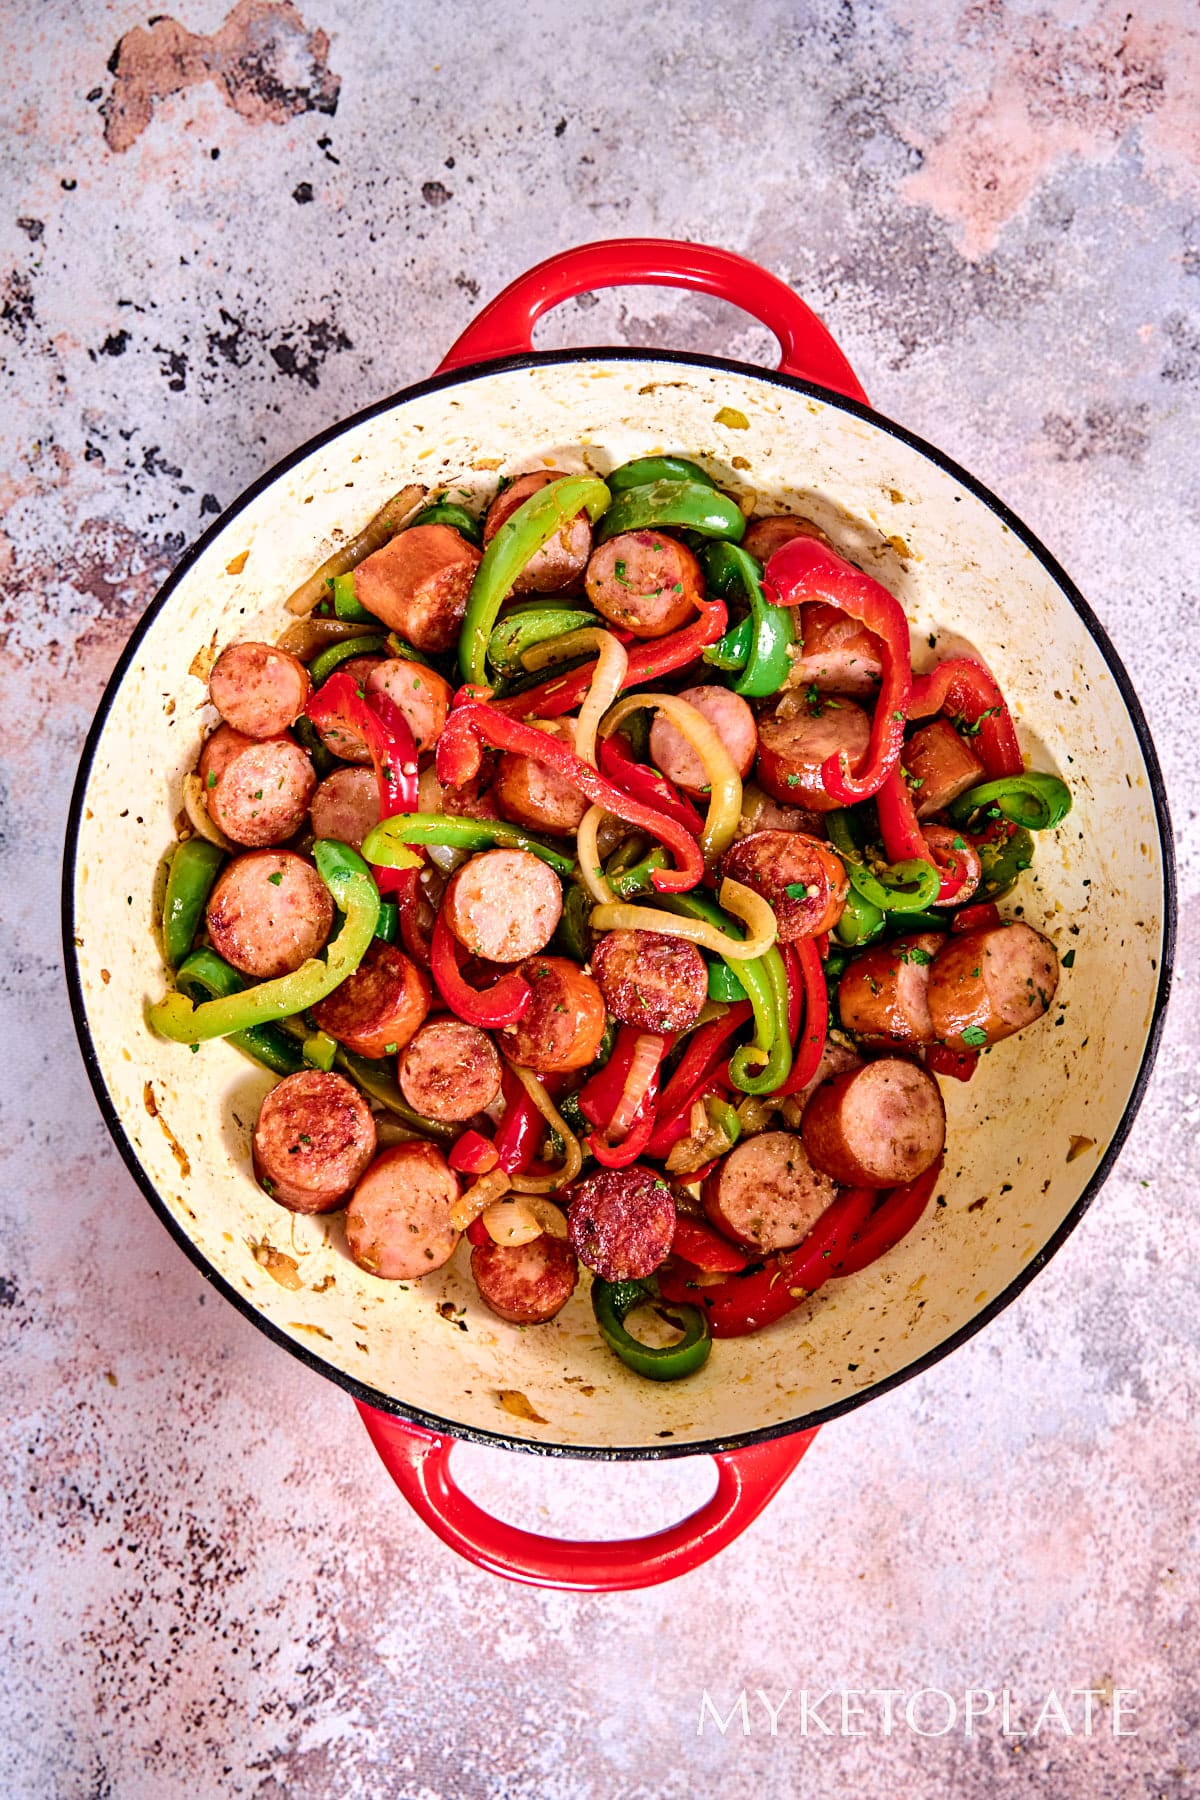 Smoked Sausage and Peppers Skillet